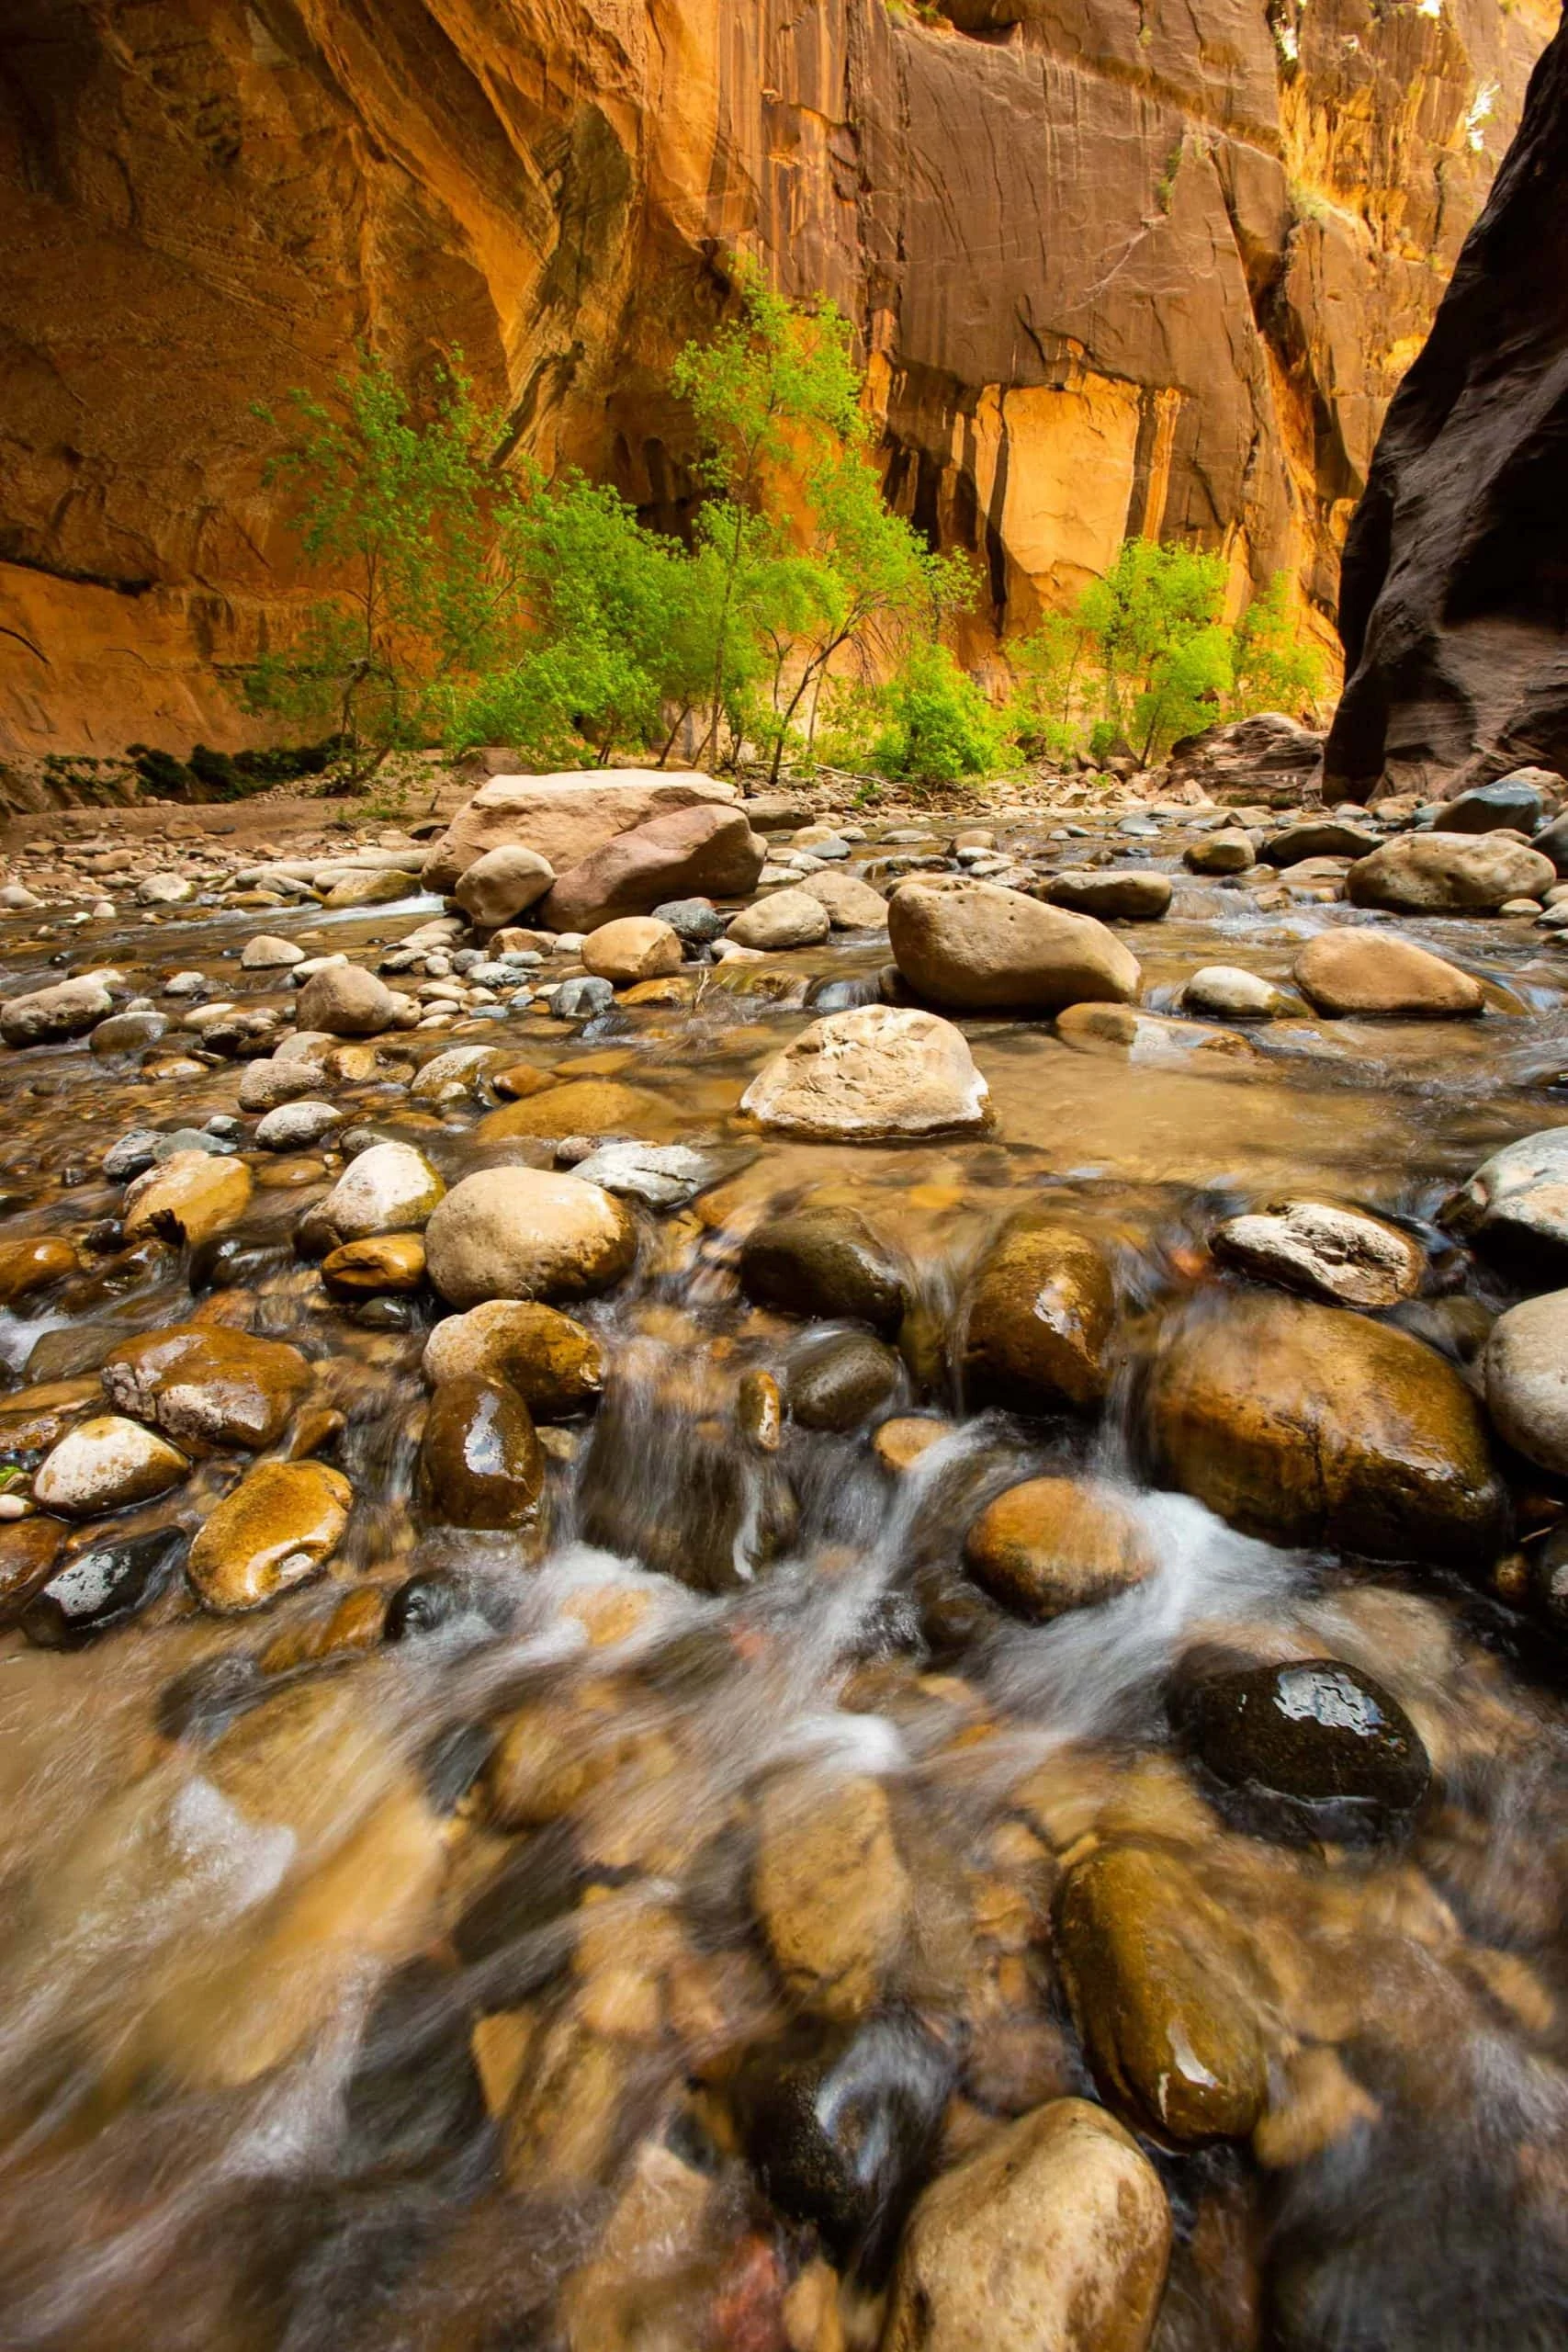 Running water in Zion Narrows near the temple of Sinawava elopement locations in Zion National Park, taken with a long exposure.